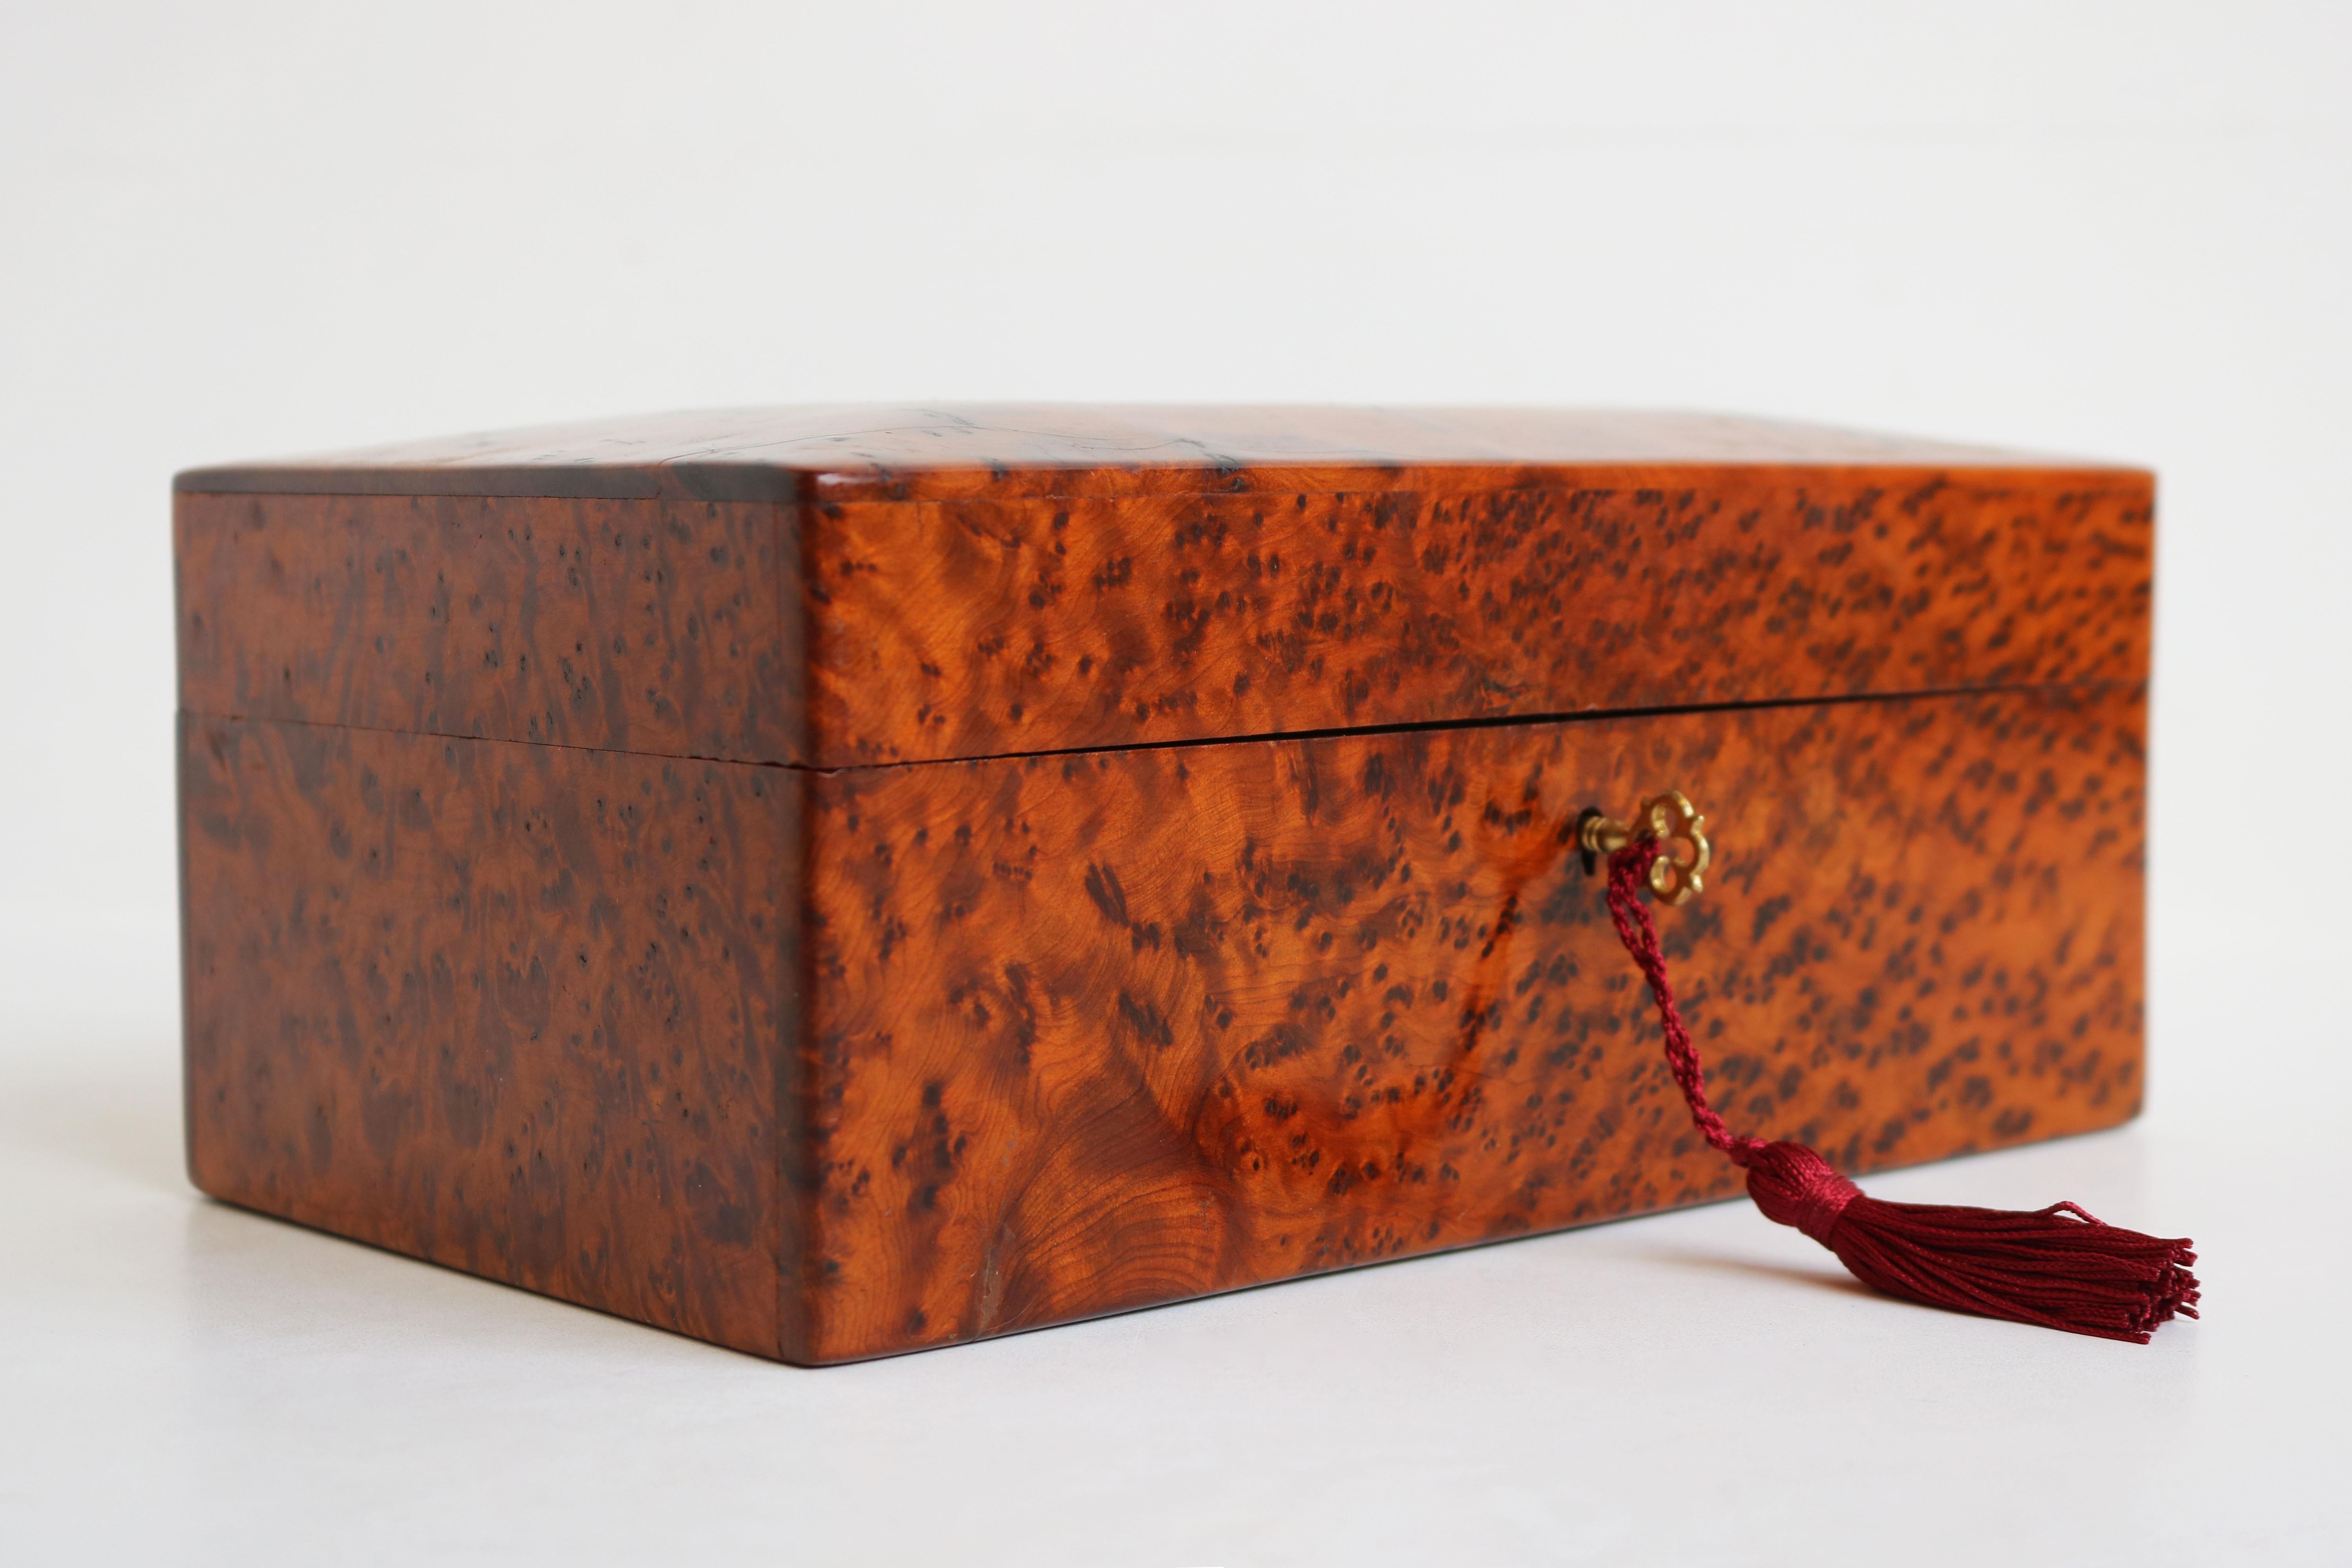 Amazing French antique 19th century Napoleon III Jewelry box made from Burl Wood. 
What an amazing look this polished burl wood made with high quality craftsmanship 
This jewelry box comes with its original lock & key. 
The interior has a